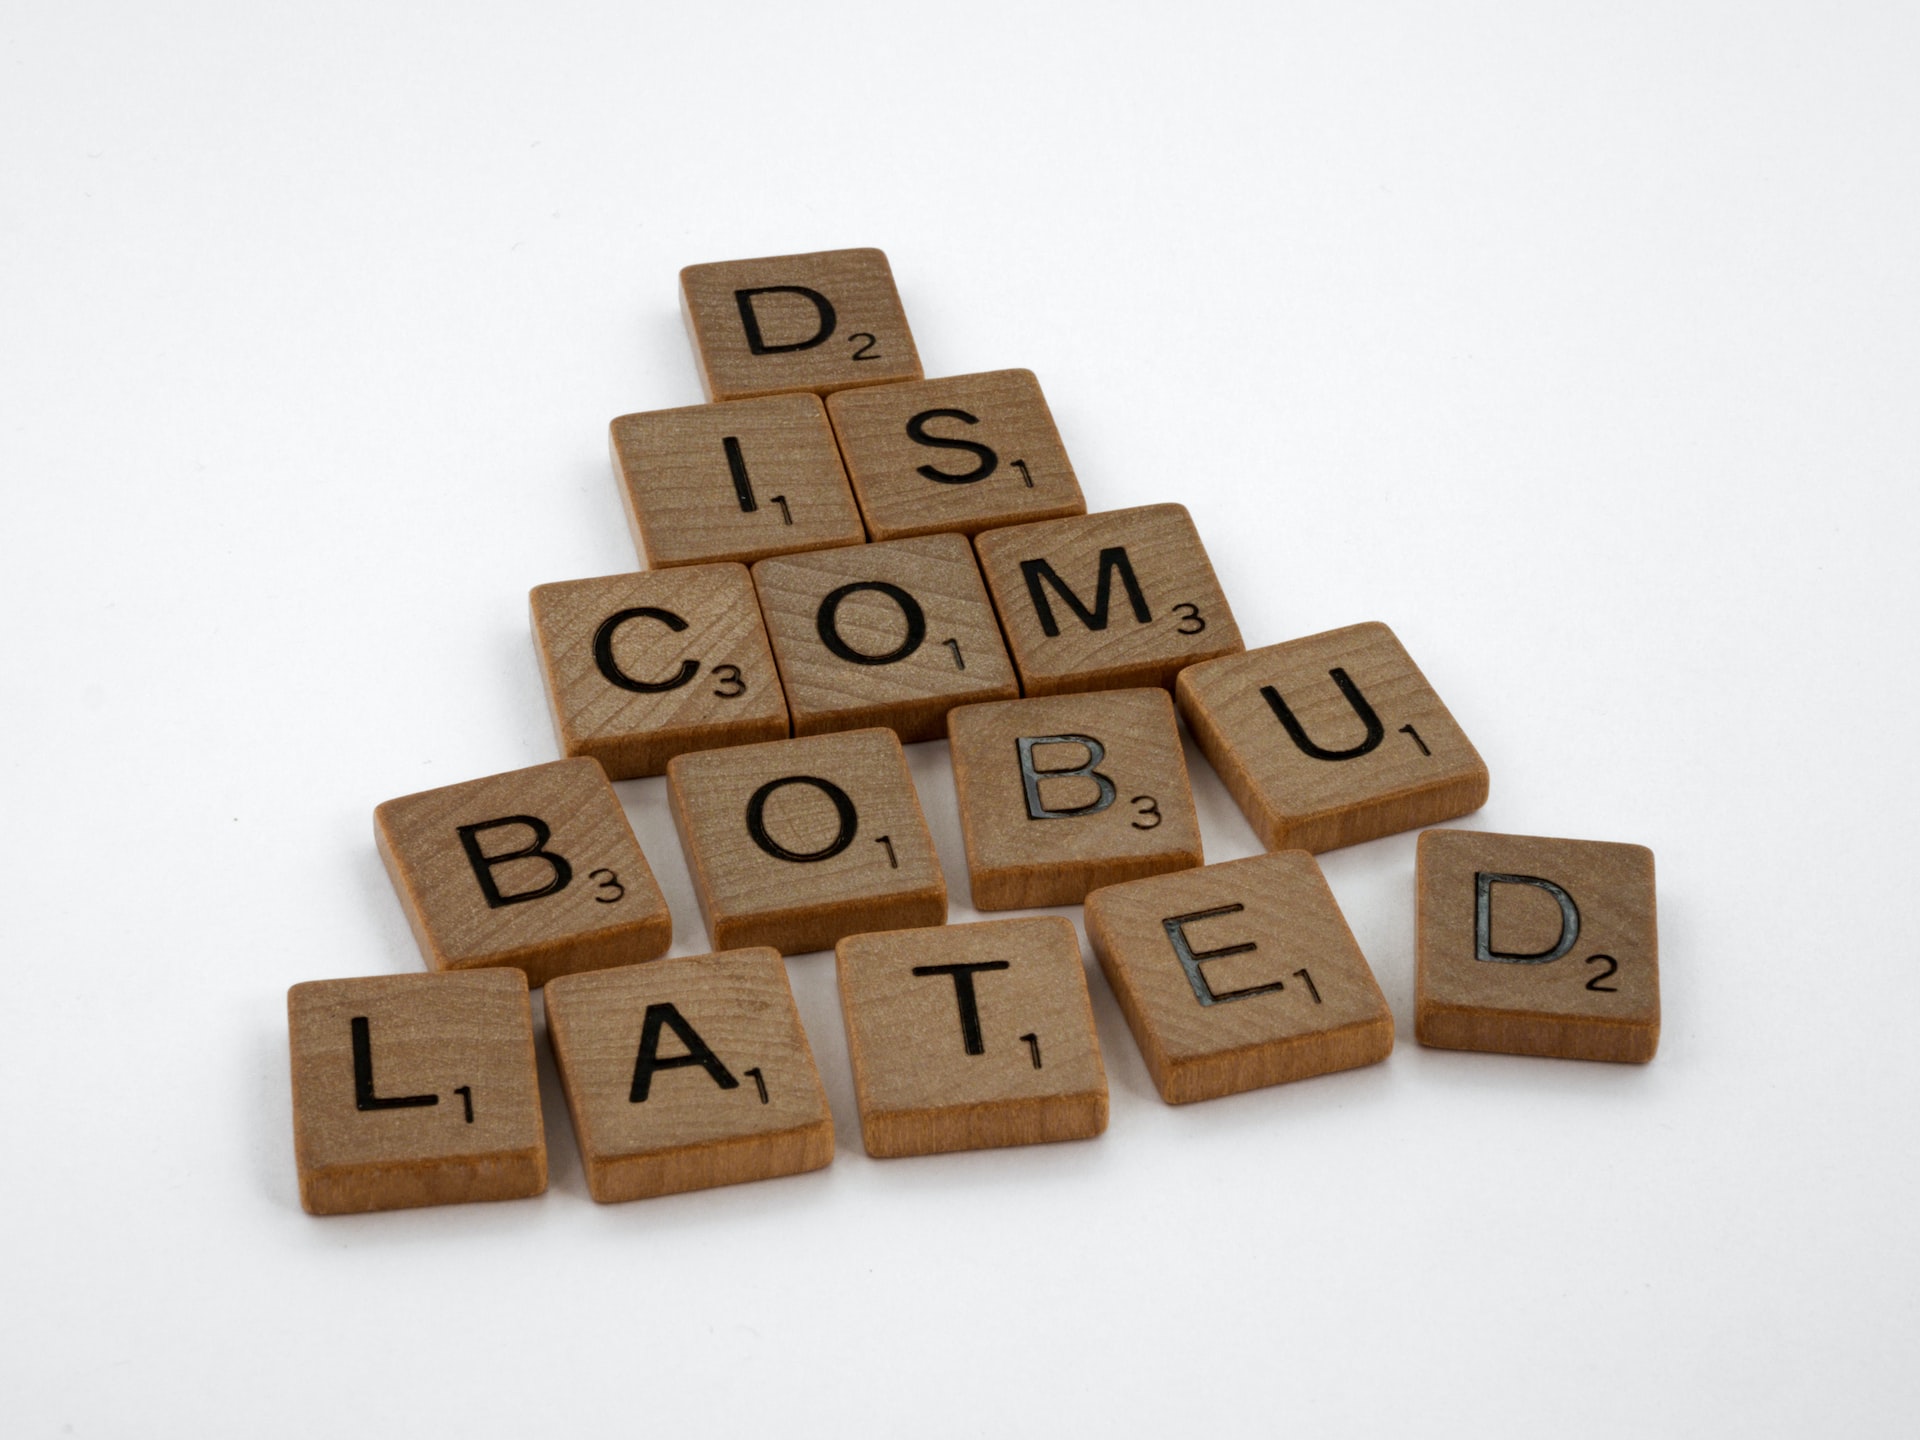 Scrabble tiles form the word discombobulated to signify misprinted books from IngramSpark